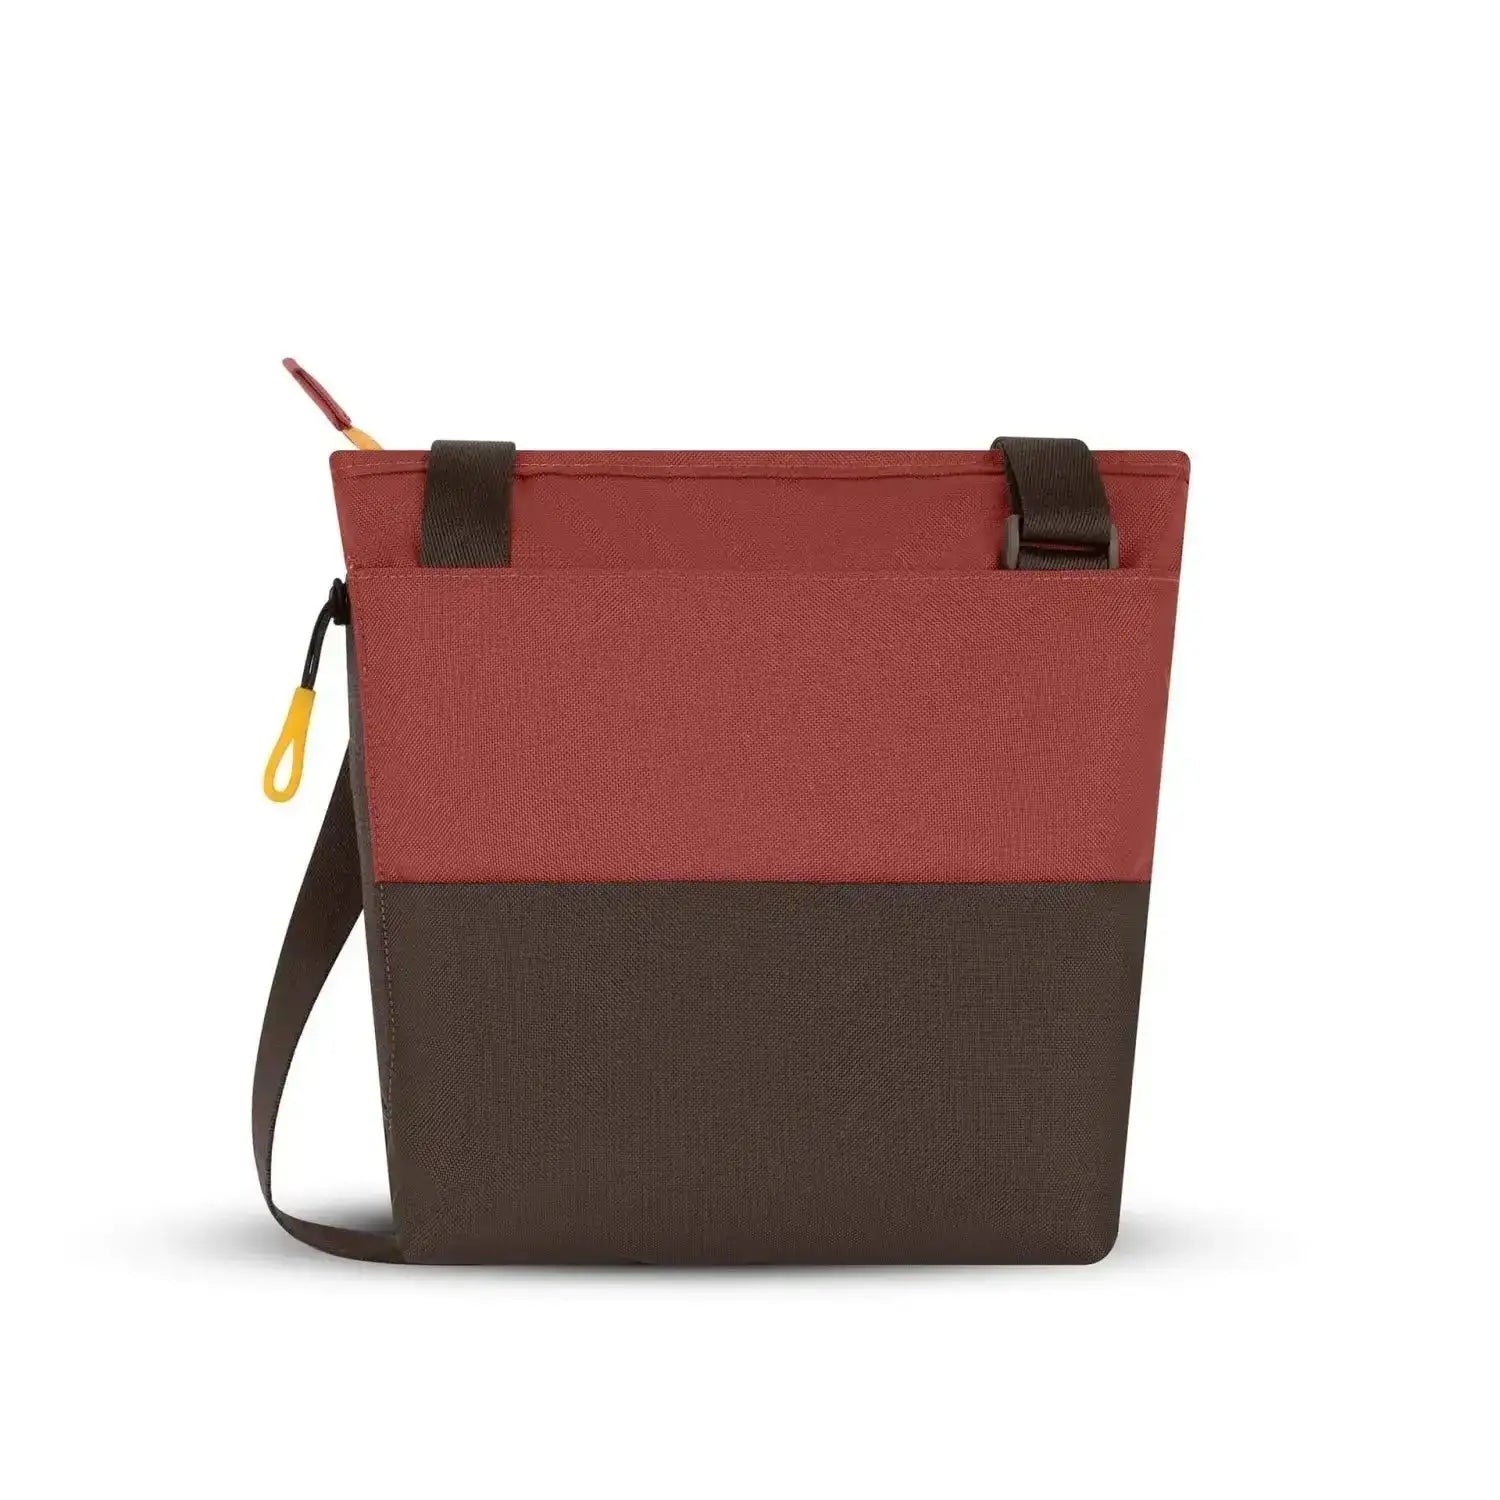 Sherpani Sadie bag. A view of the back with cider red top half and dark brown bottom half; dark brown handles and crossbody strap.